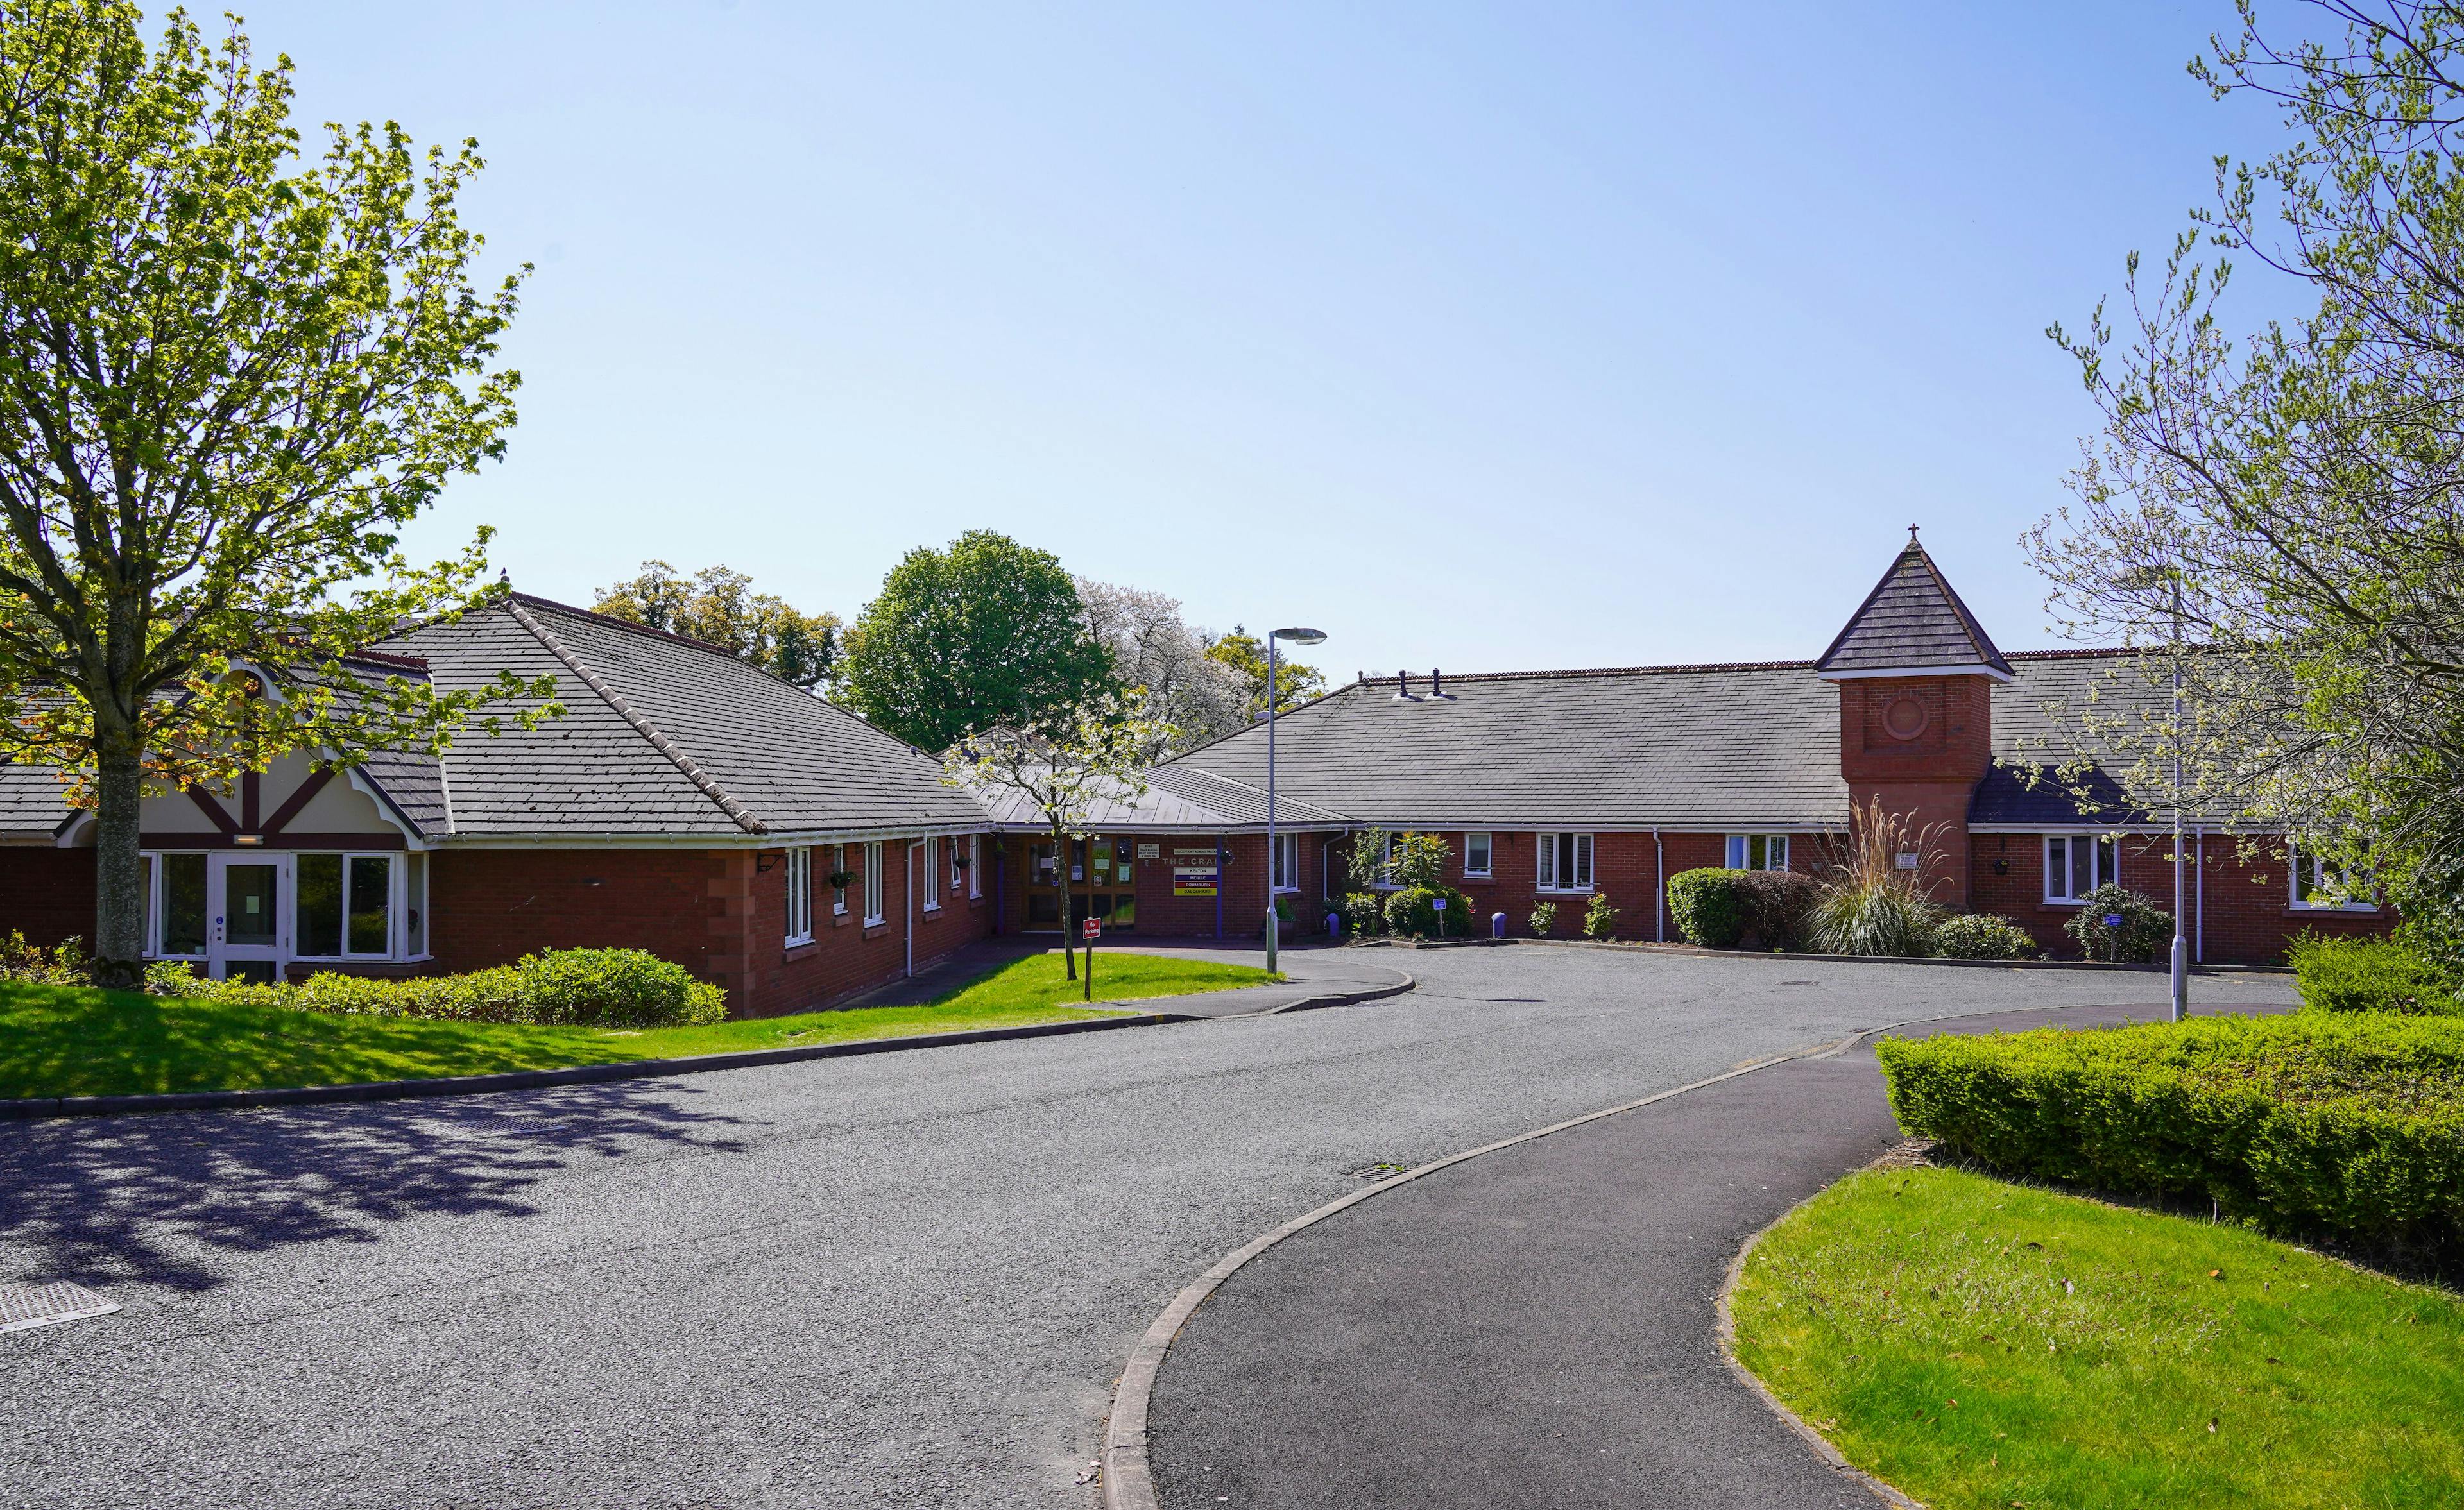 Exterior of Allanbank Care Home in Dumfries and Galloway, Stewartry of Kirkcudbright